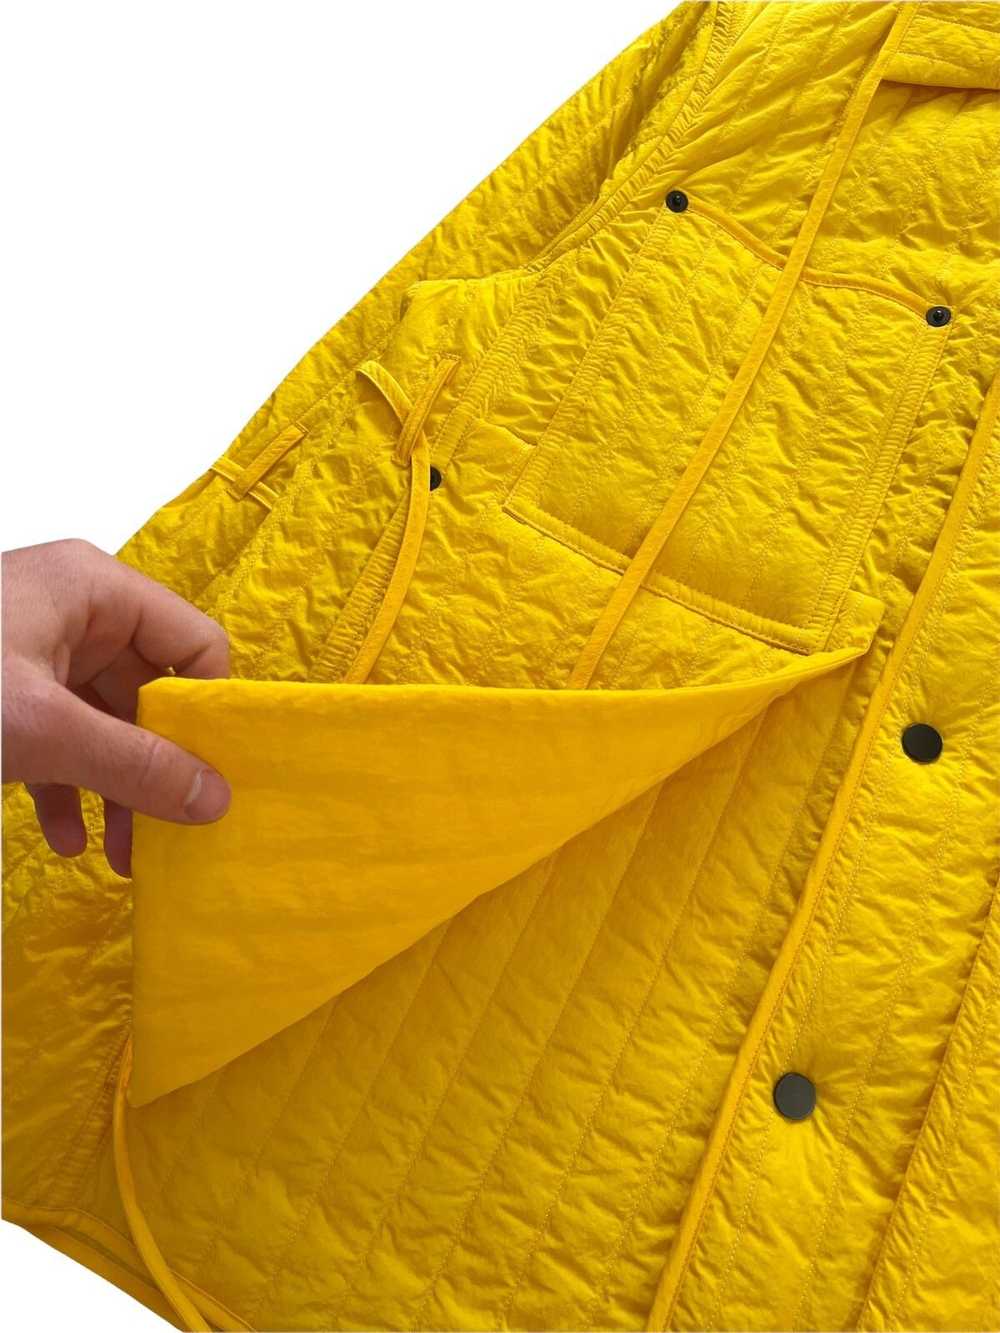 Craig Green SS2016 Yellow Quilted Work Jacket - image 7